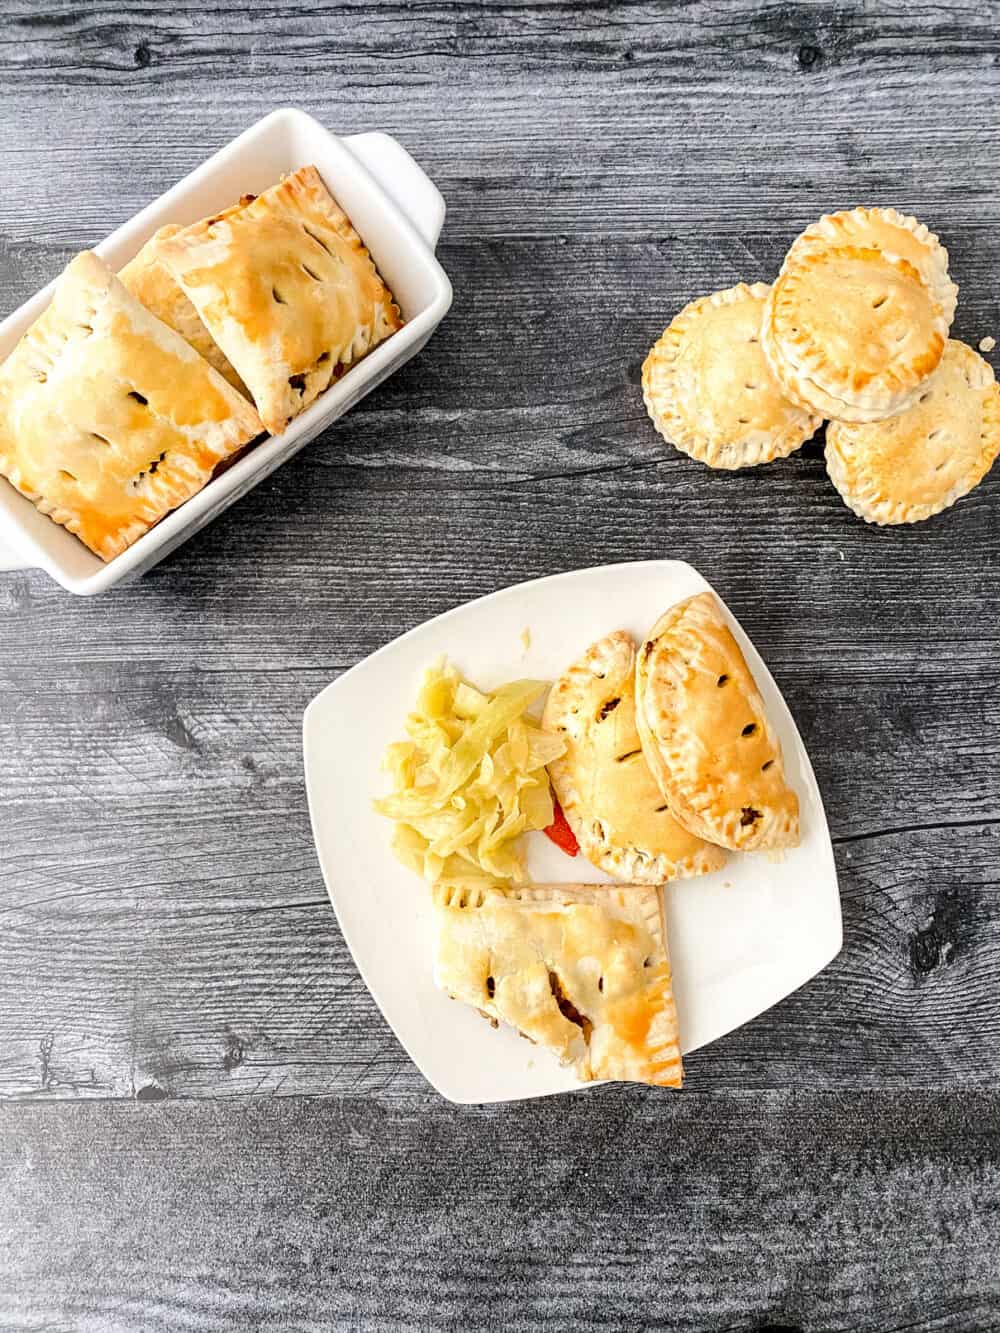 It’s your lucky day - these Irish Meat Pies are just what you need for this year’s St. Patrick’s Day celebration. Learn how to make them with my easy-to-follow recipe tutorial!